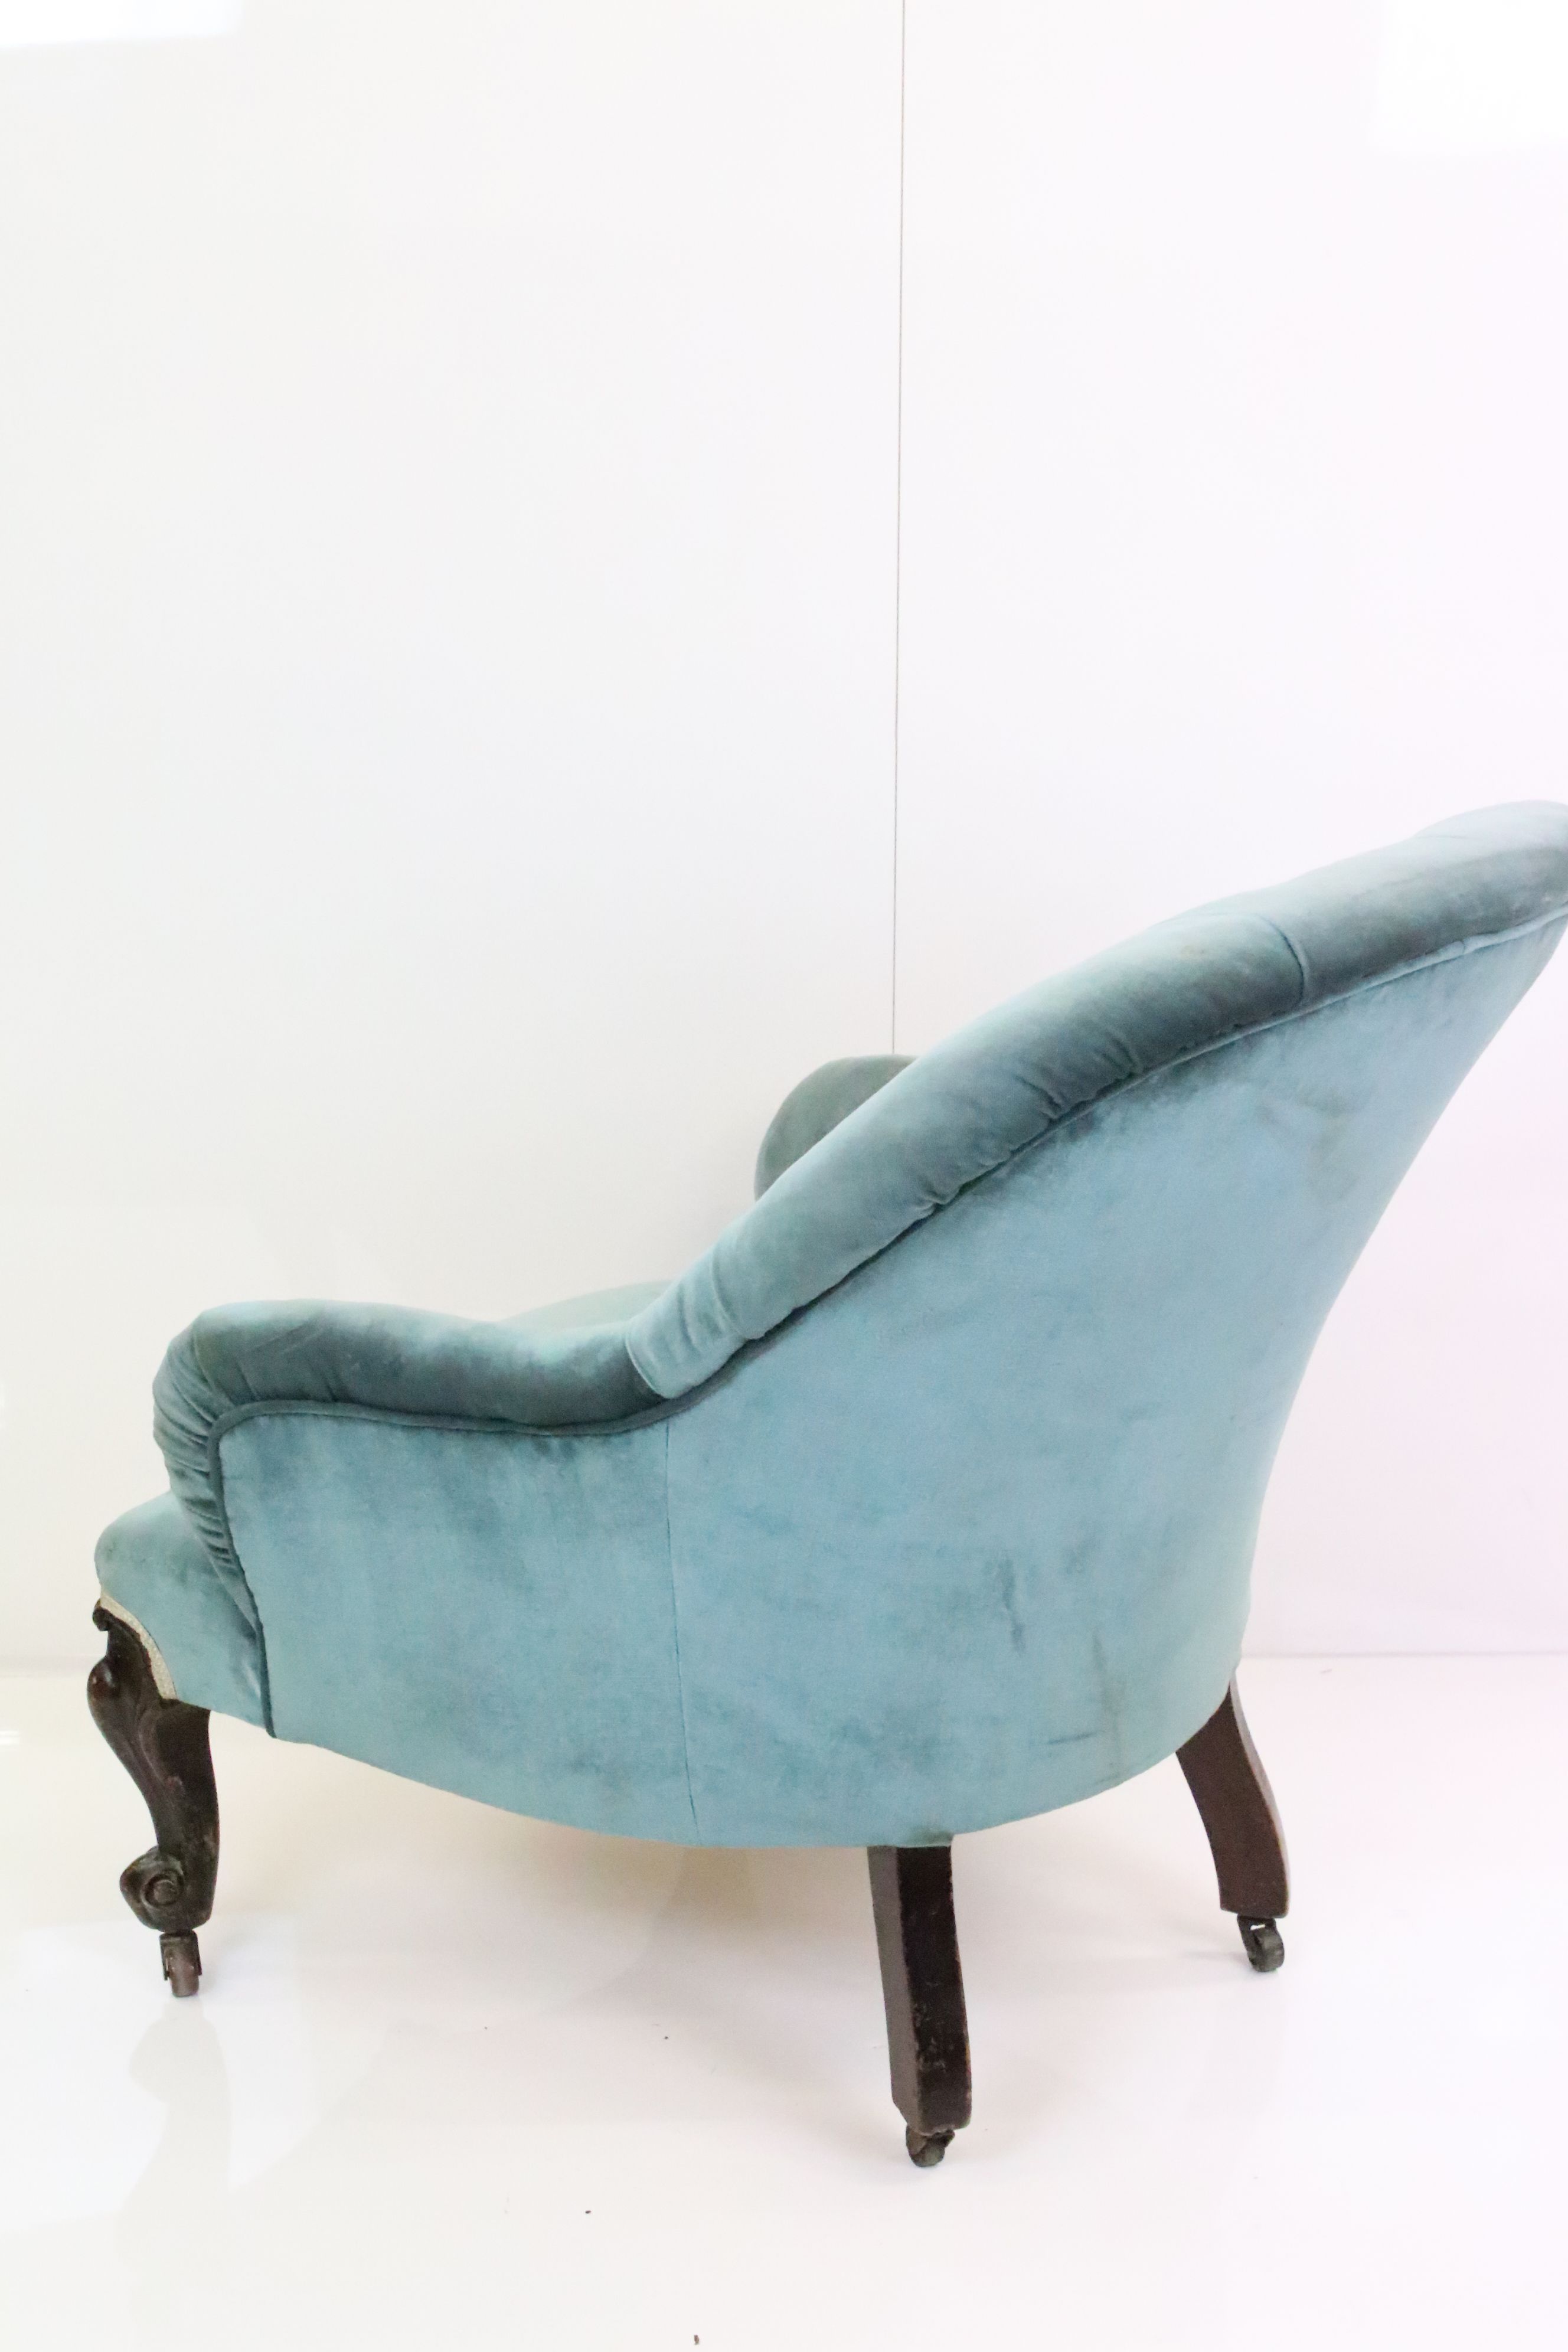 Victorian Button Back Armchair upholstered in blue fabric, raised on carved scrolling front legs - Image 7 of 7